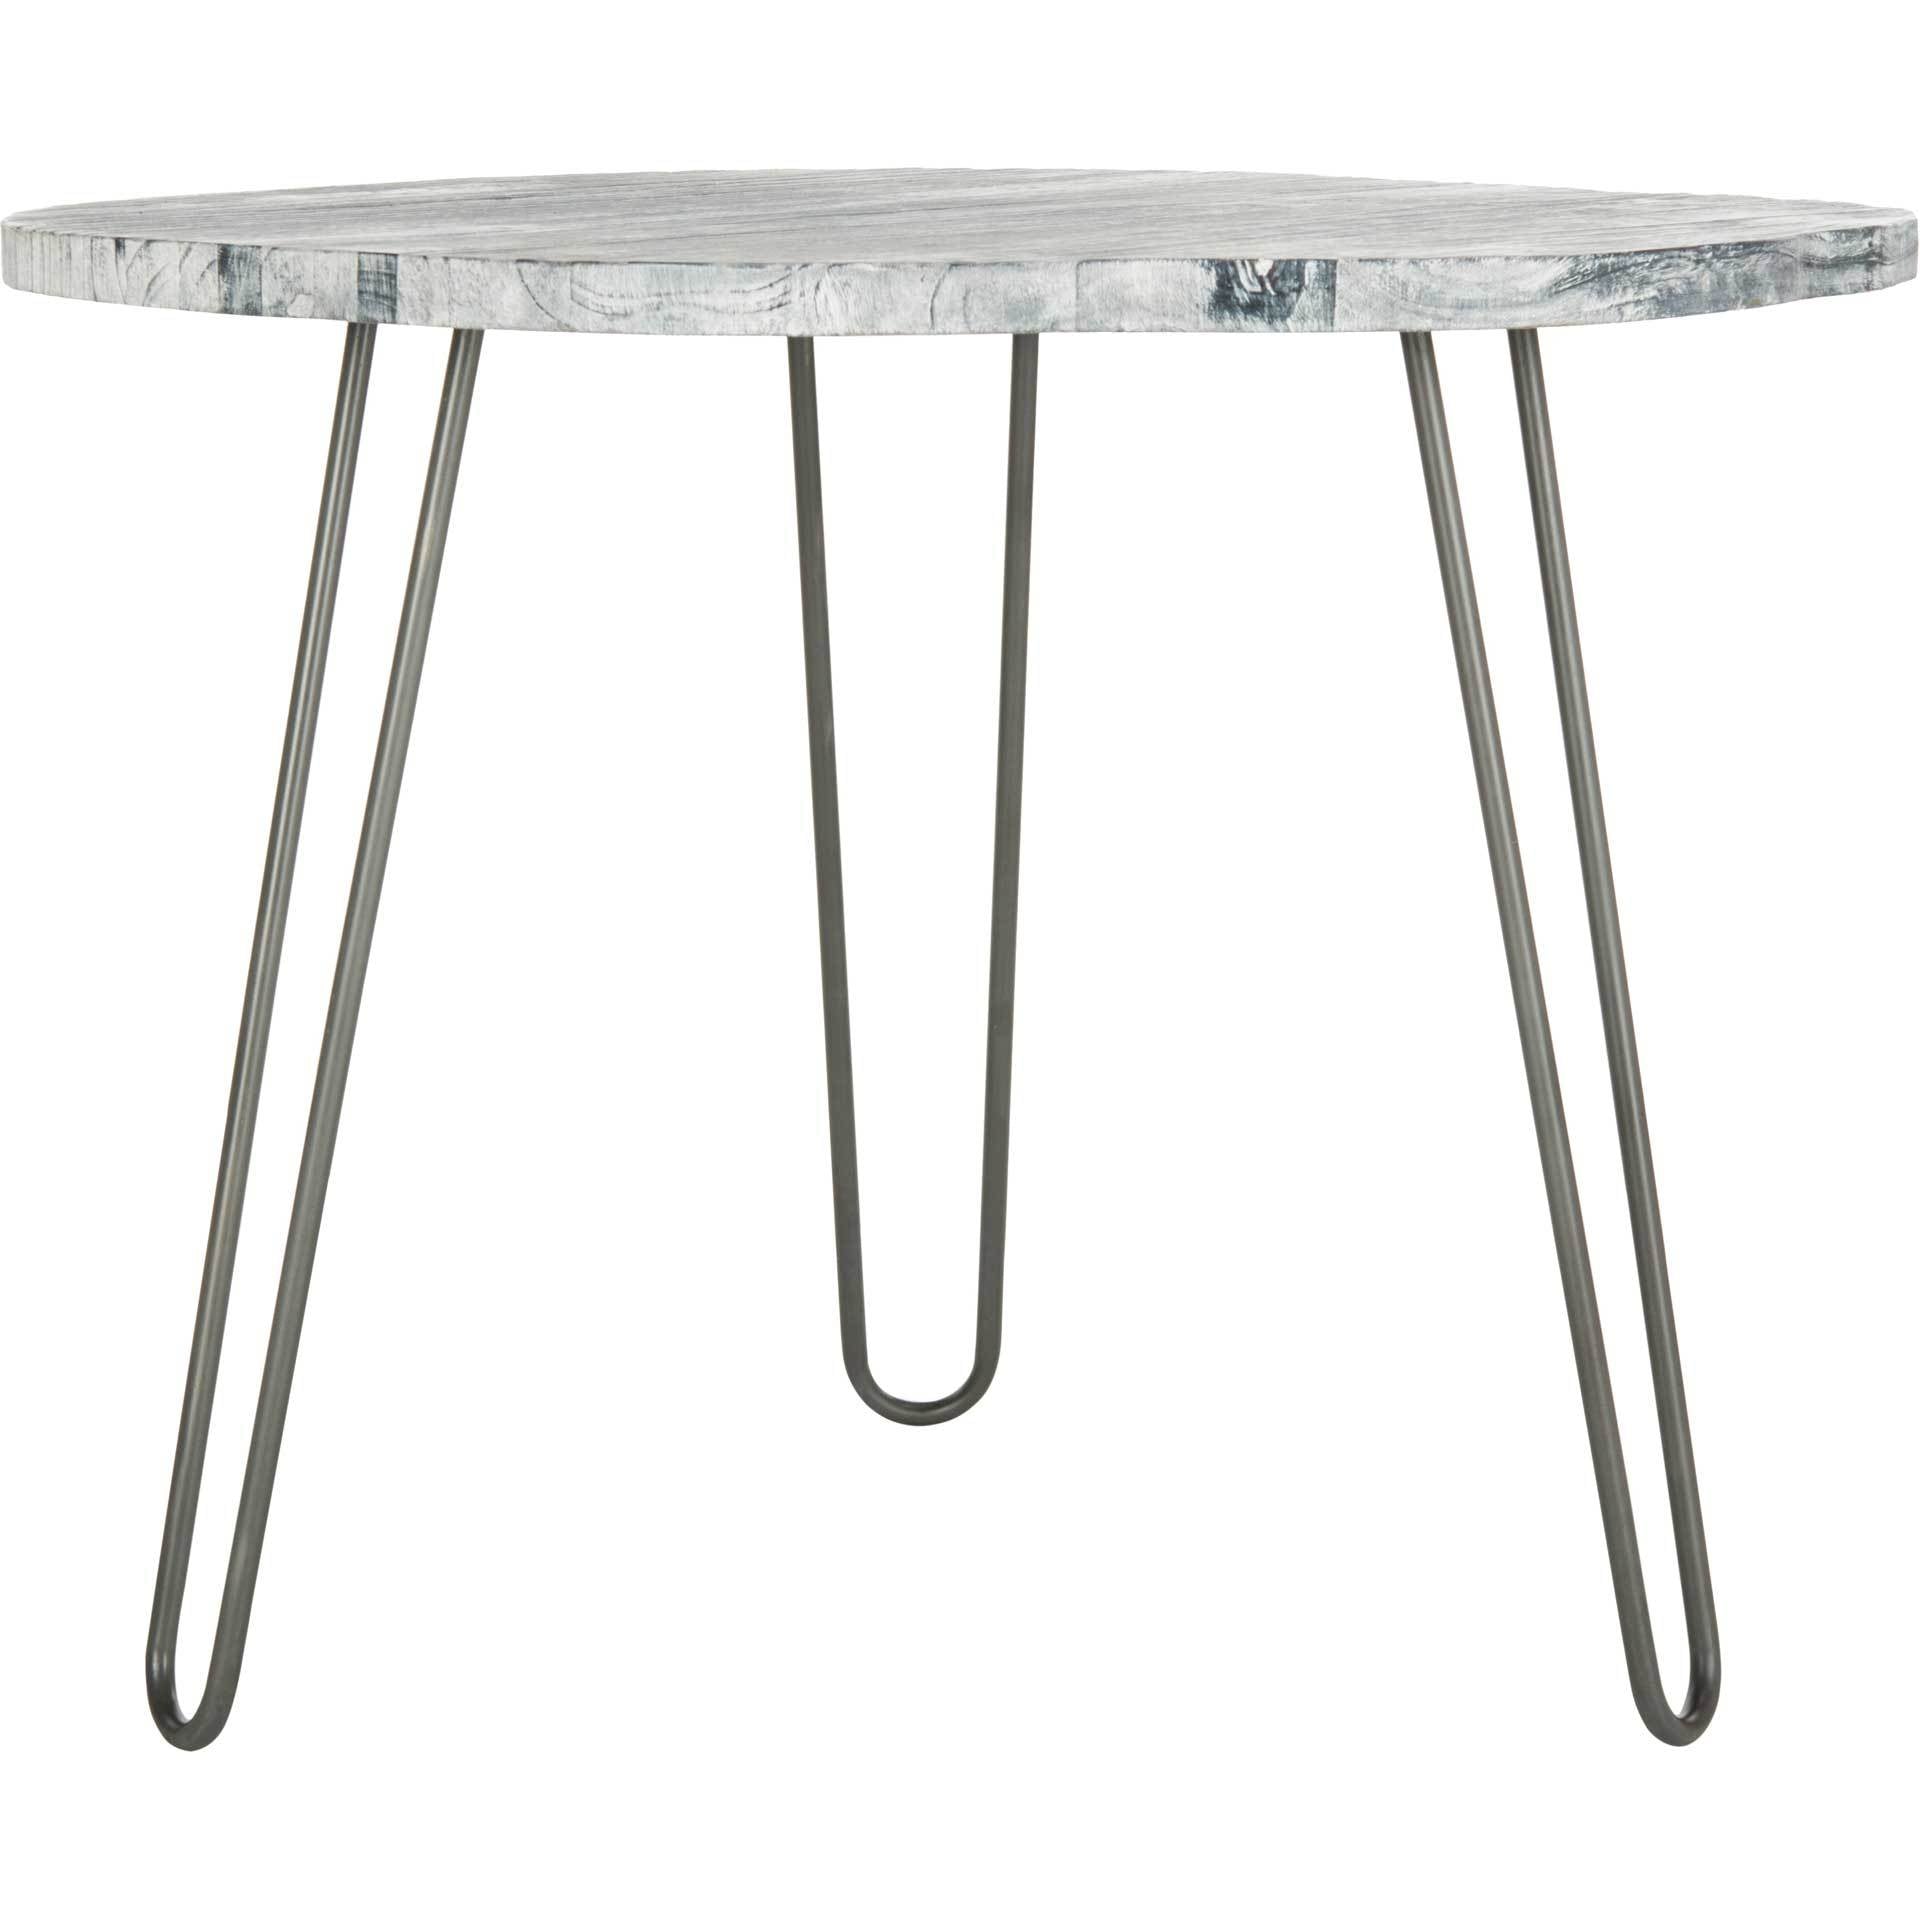 Miller Dining Table Gray/White Washed